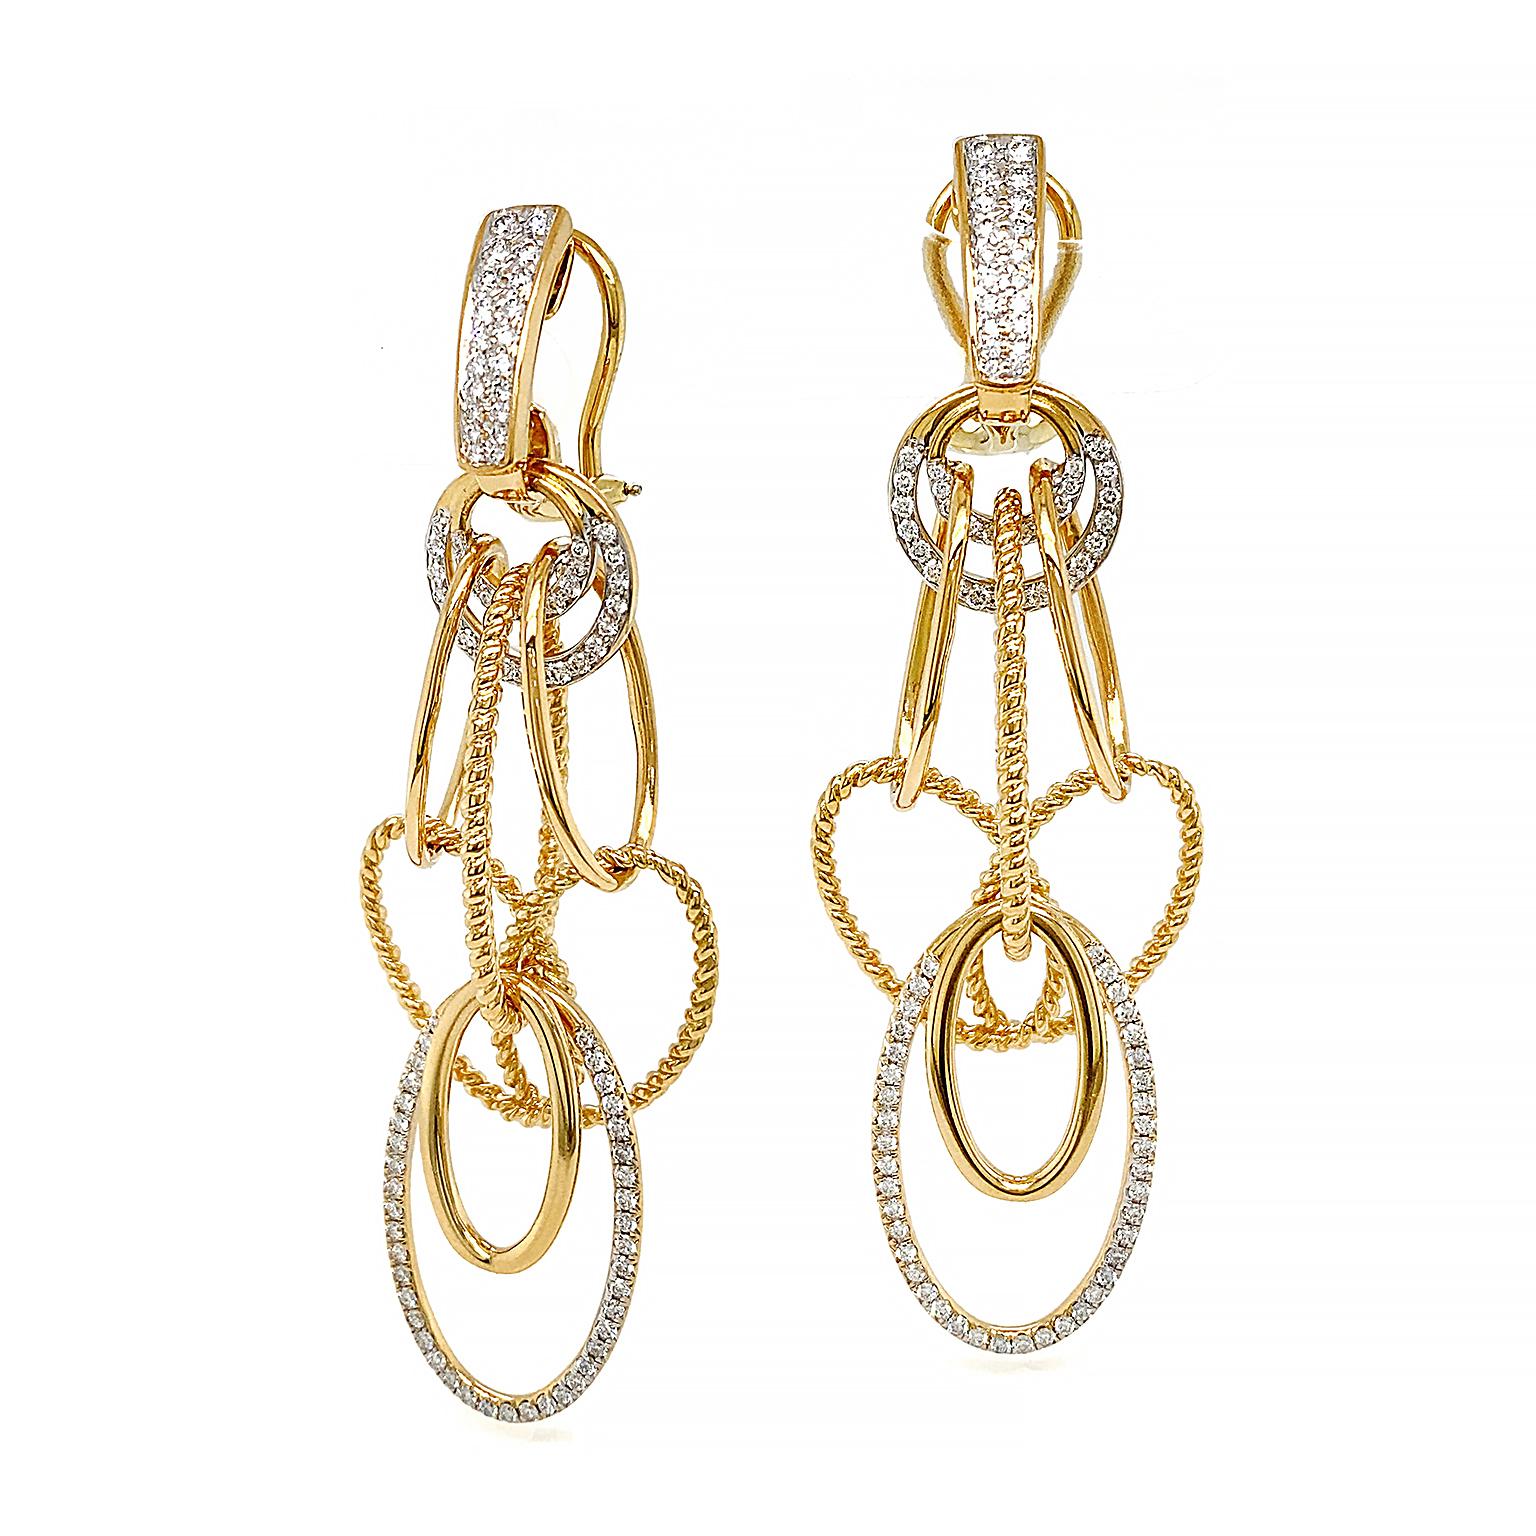 Layers of luminous 18k yellow gold ovals and brilliant cut diamonds form hoop earrings. A total of 190 brilliant cut diamonds embellish the design, weighing 1.49 carats, beginning with fully decorated lever backs. In this elegant interpretation of